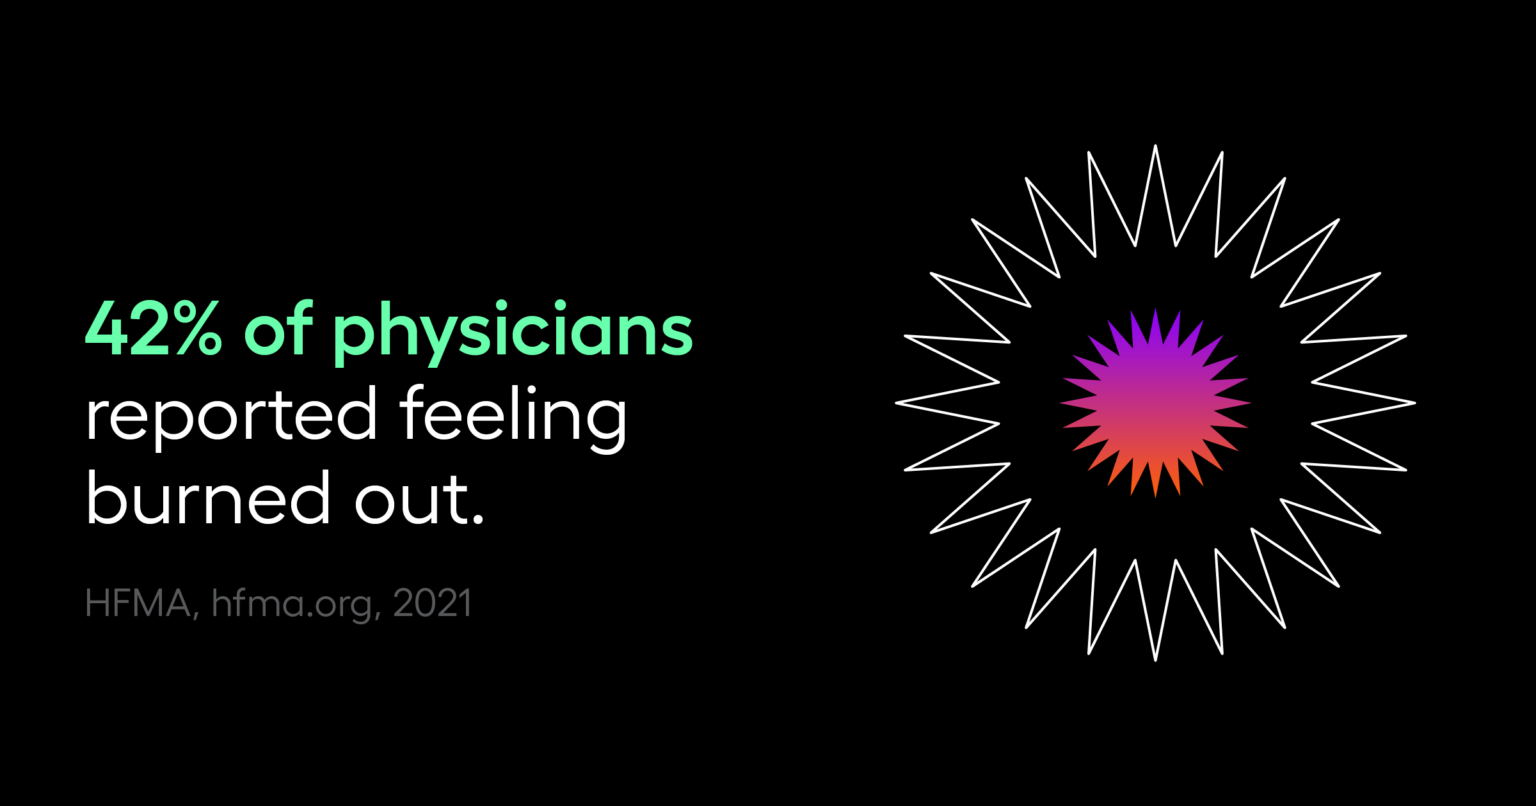 42% of physicians reported feeling burned out.